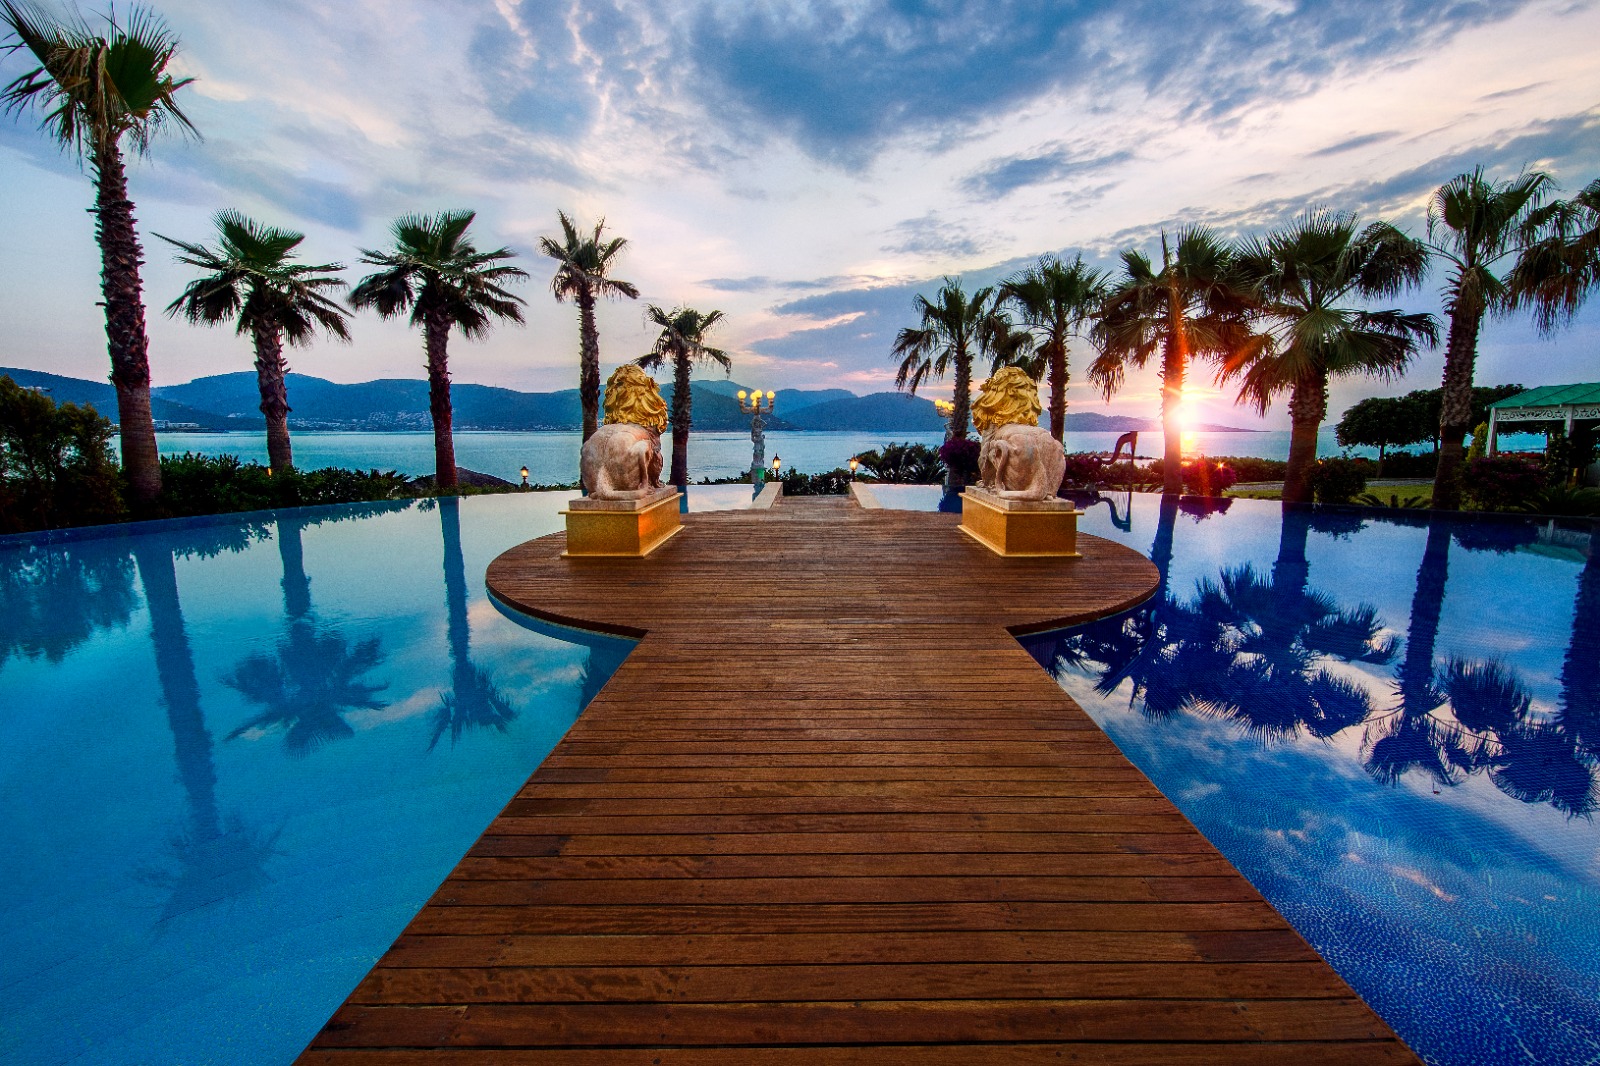 The Most Expensive Hotel Villas in Turkey